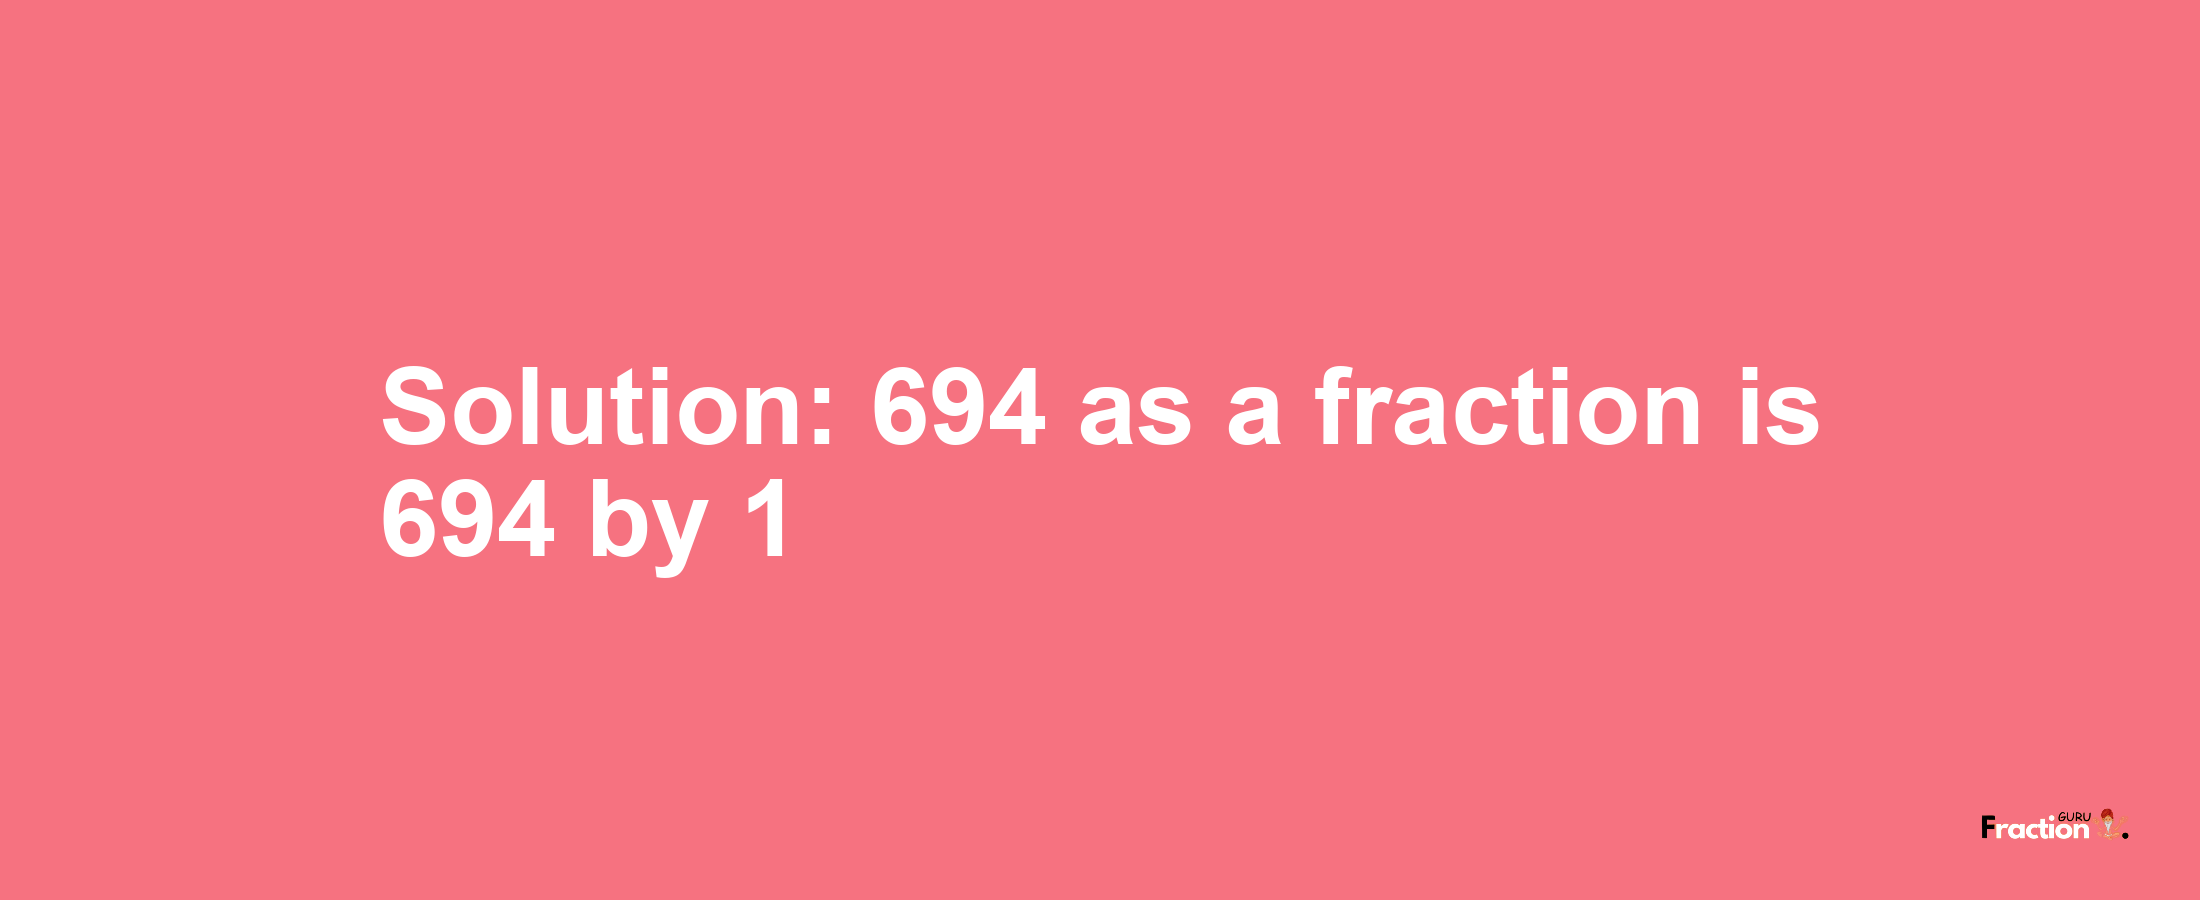 Solution:694 as a fraction is 694/1